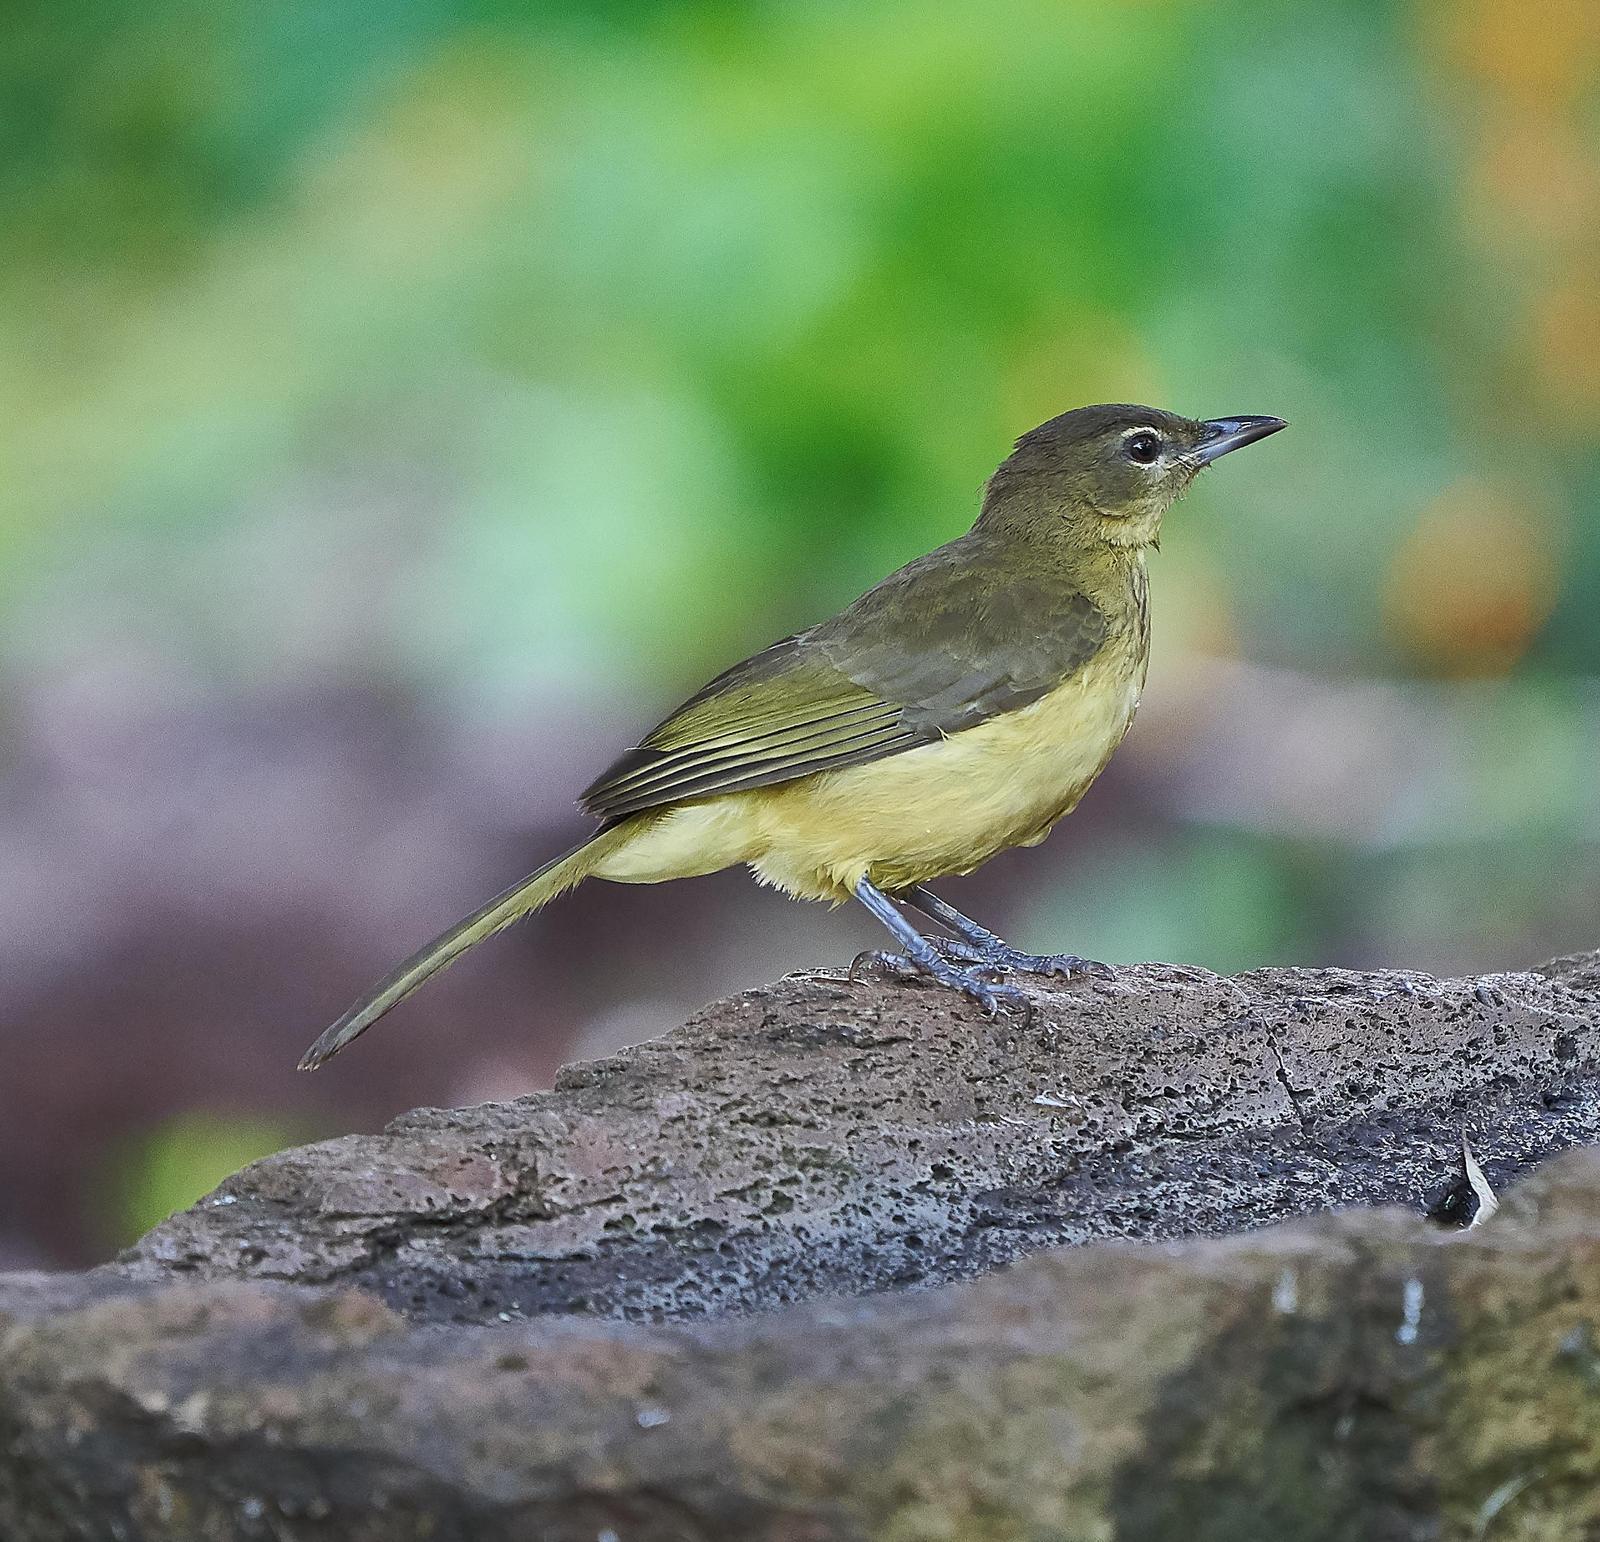 Yellow-bellied Greenbul Photo by Steven Cheong